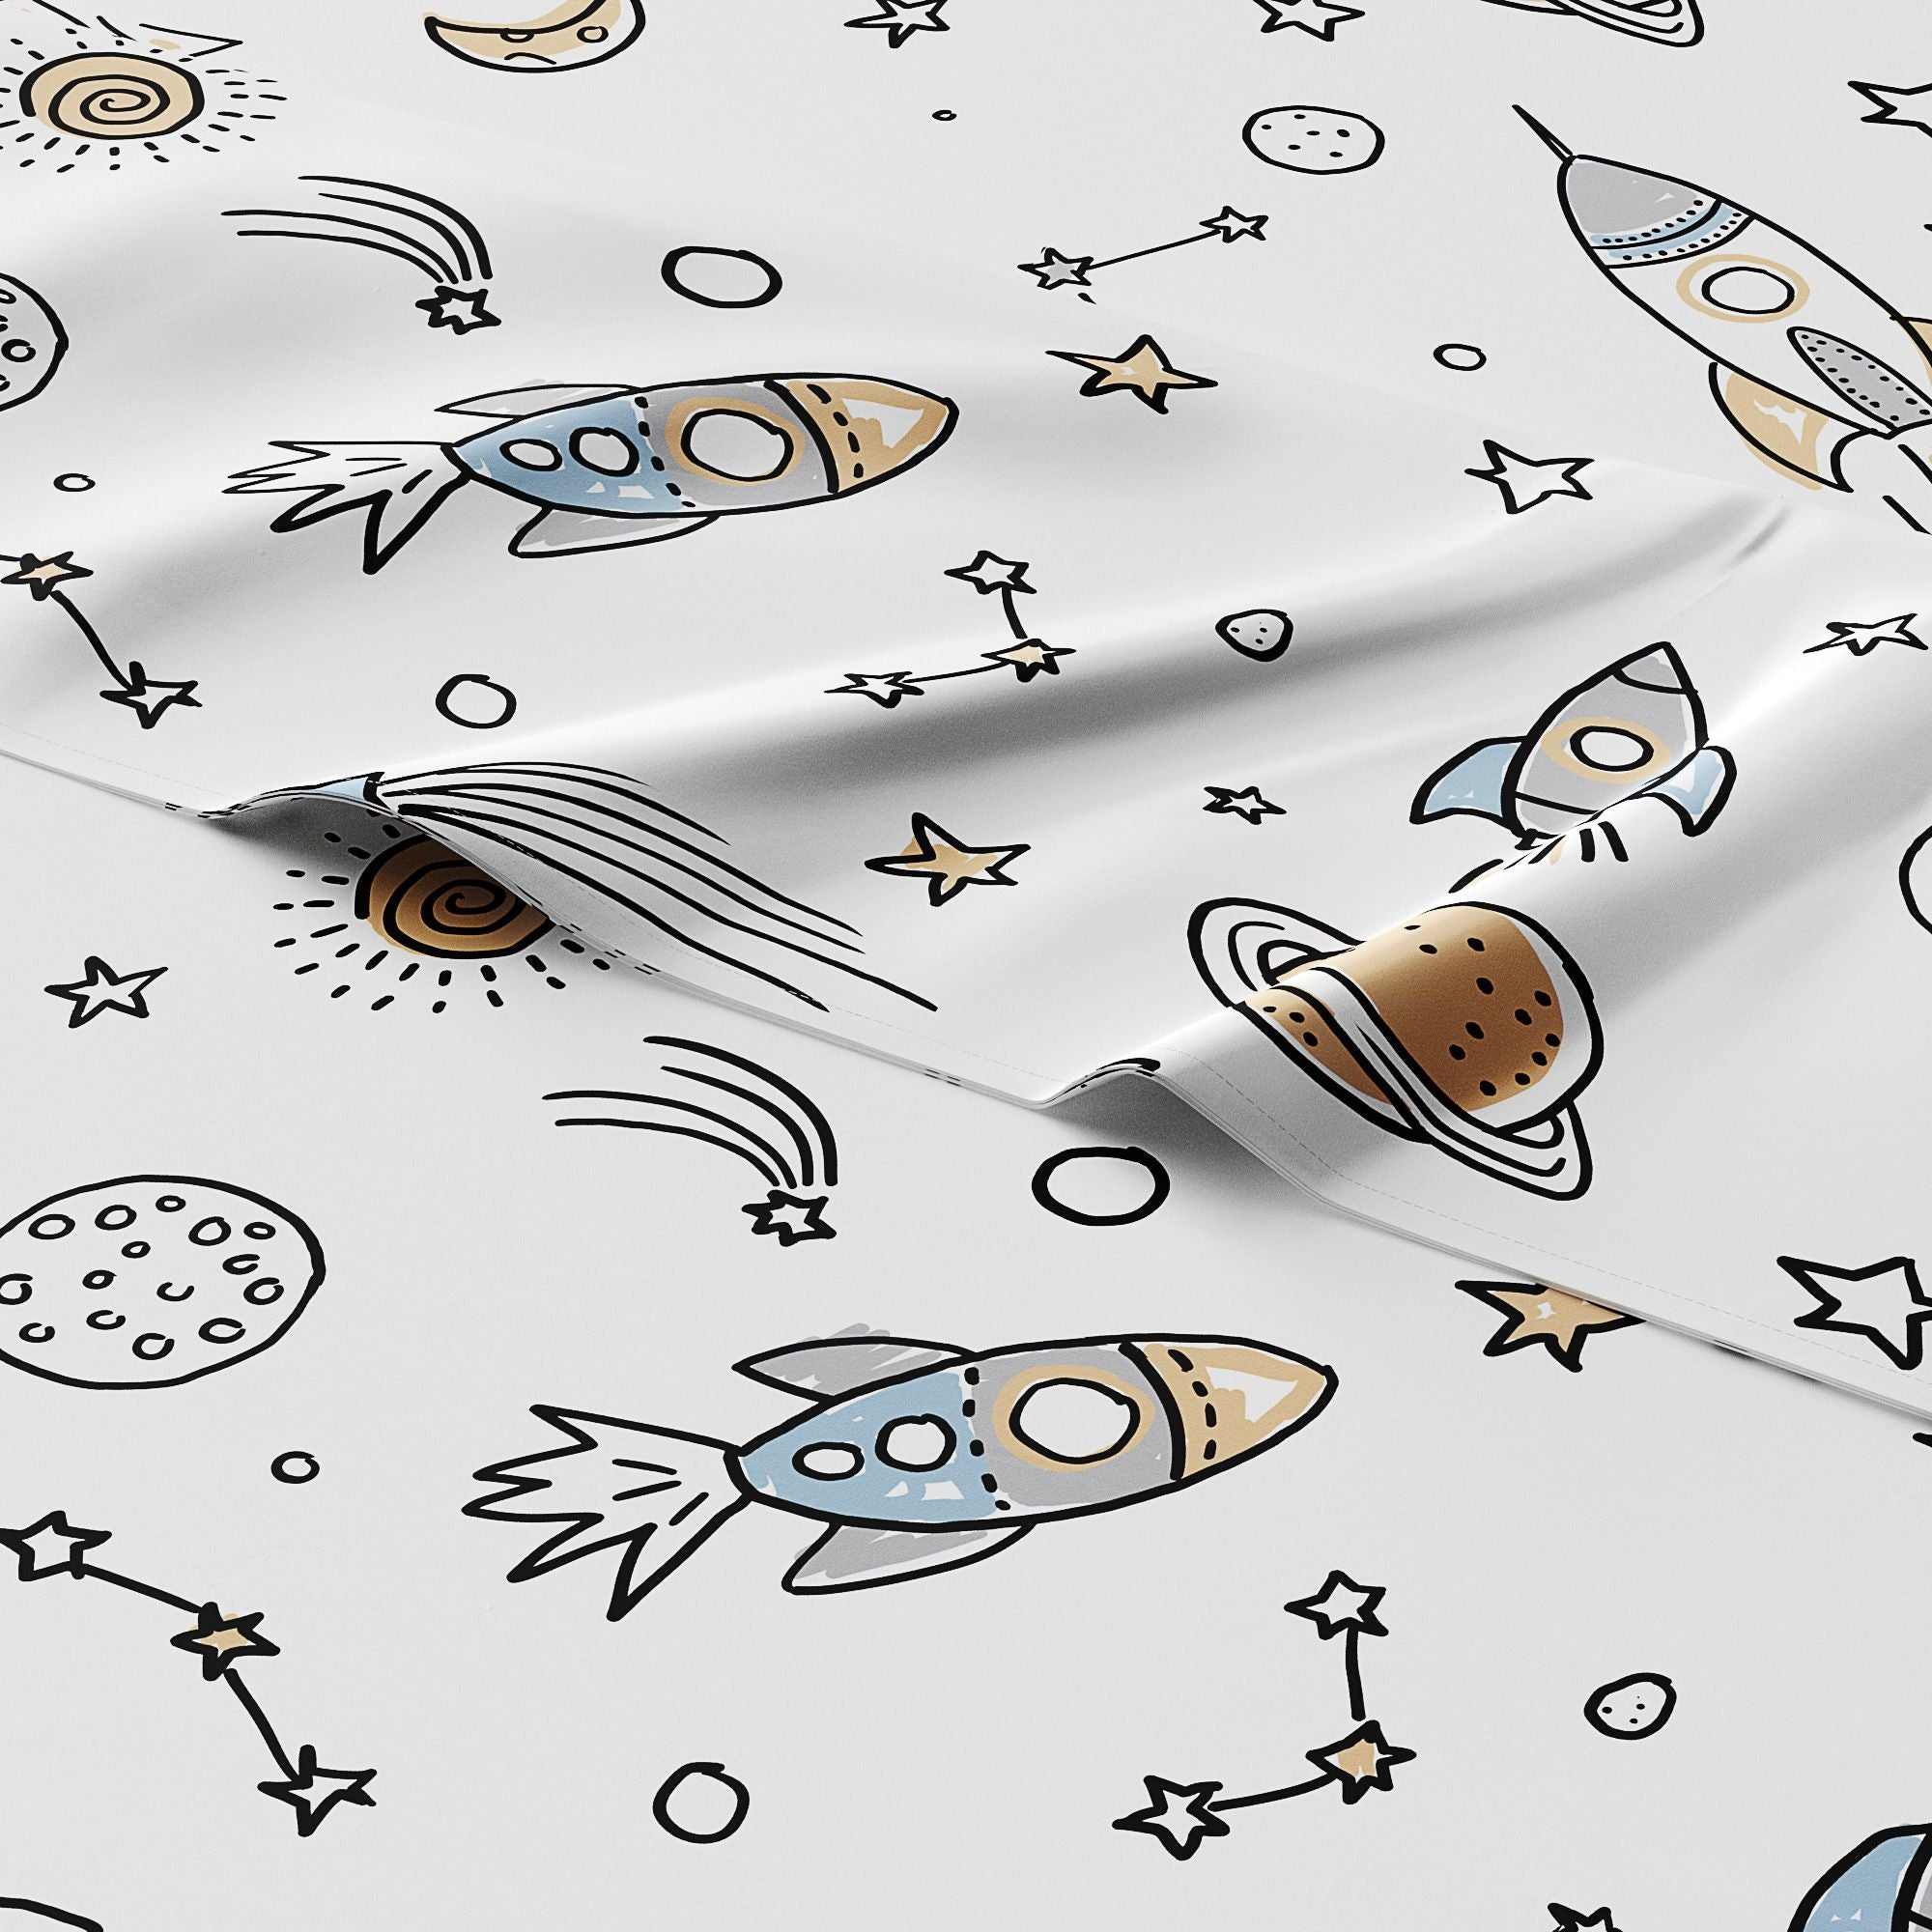 New Kids Sheet Set - Outer Space